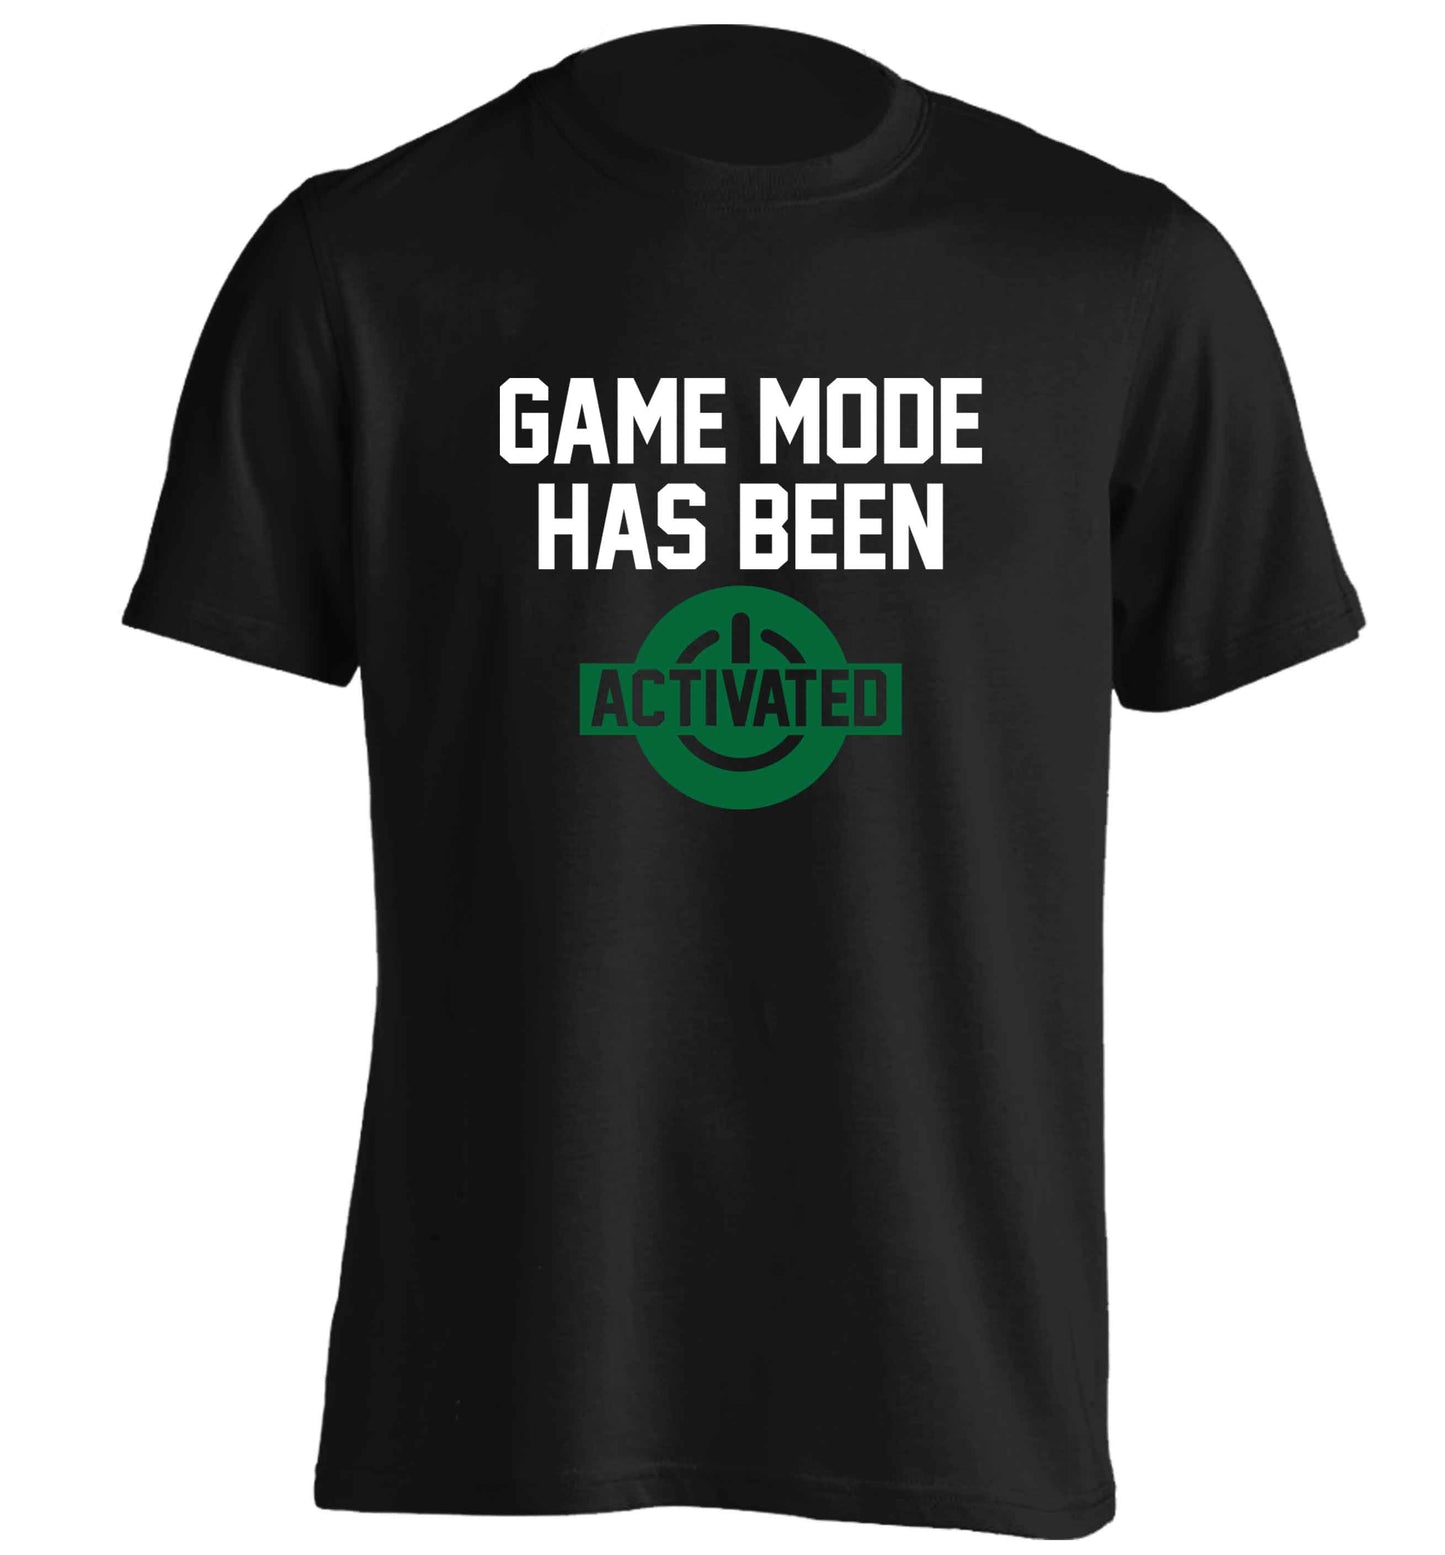 Game mode has been activated adults unisex black Tshirt 2XL